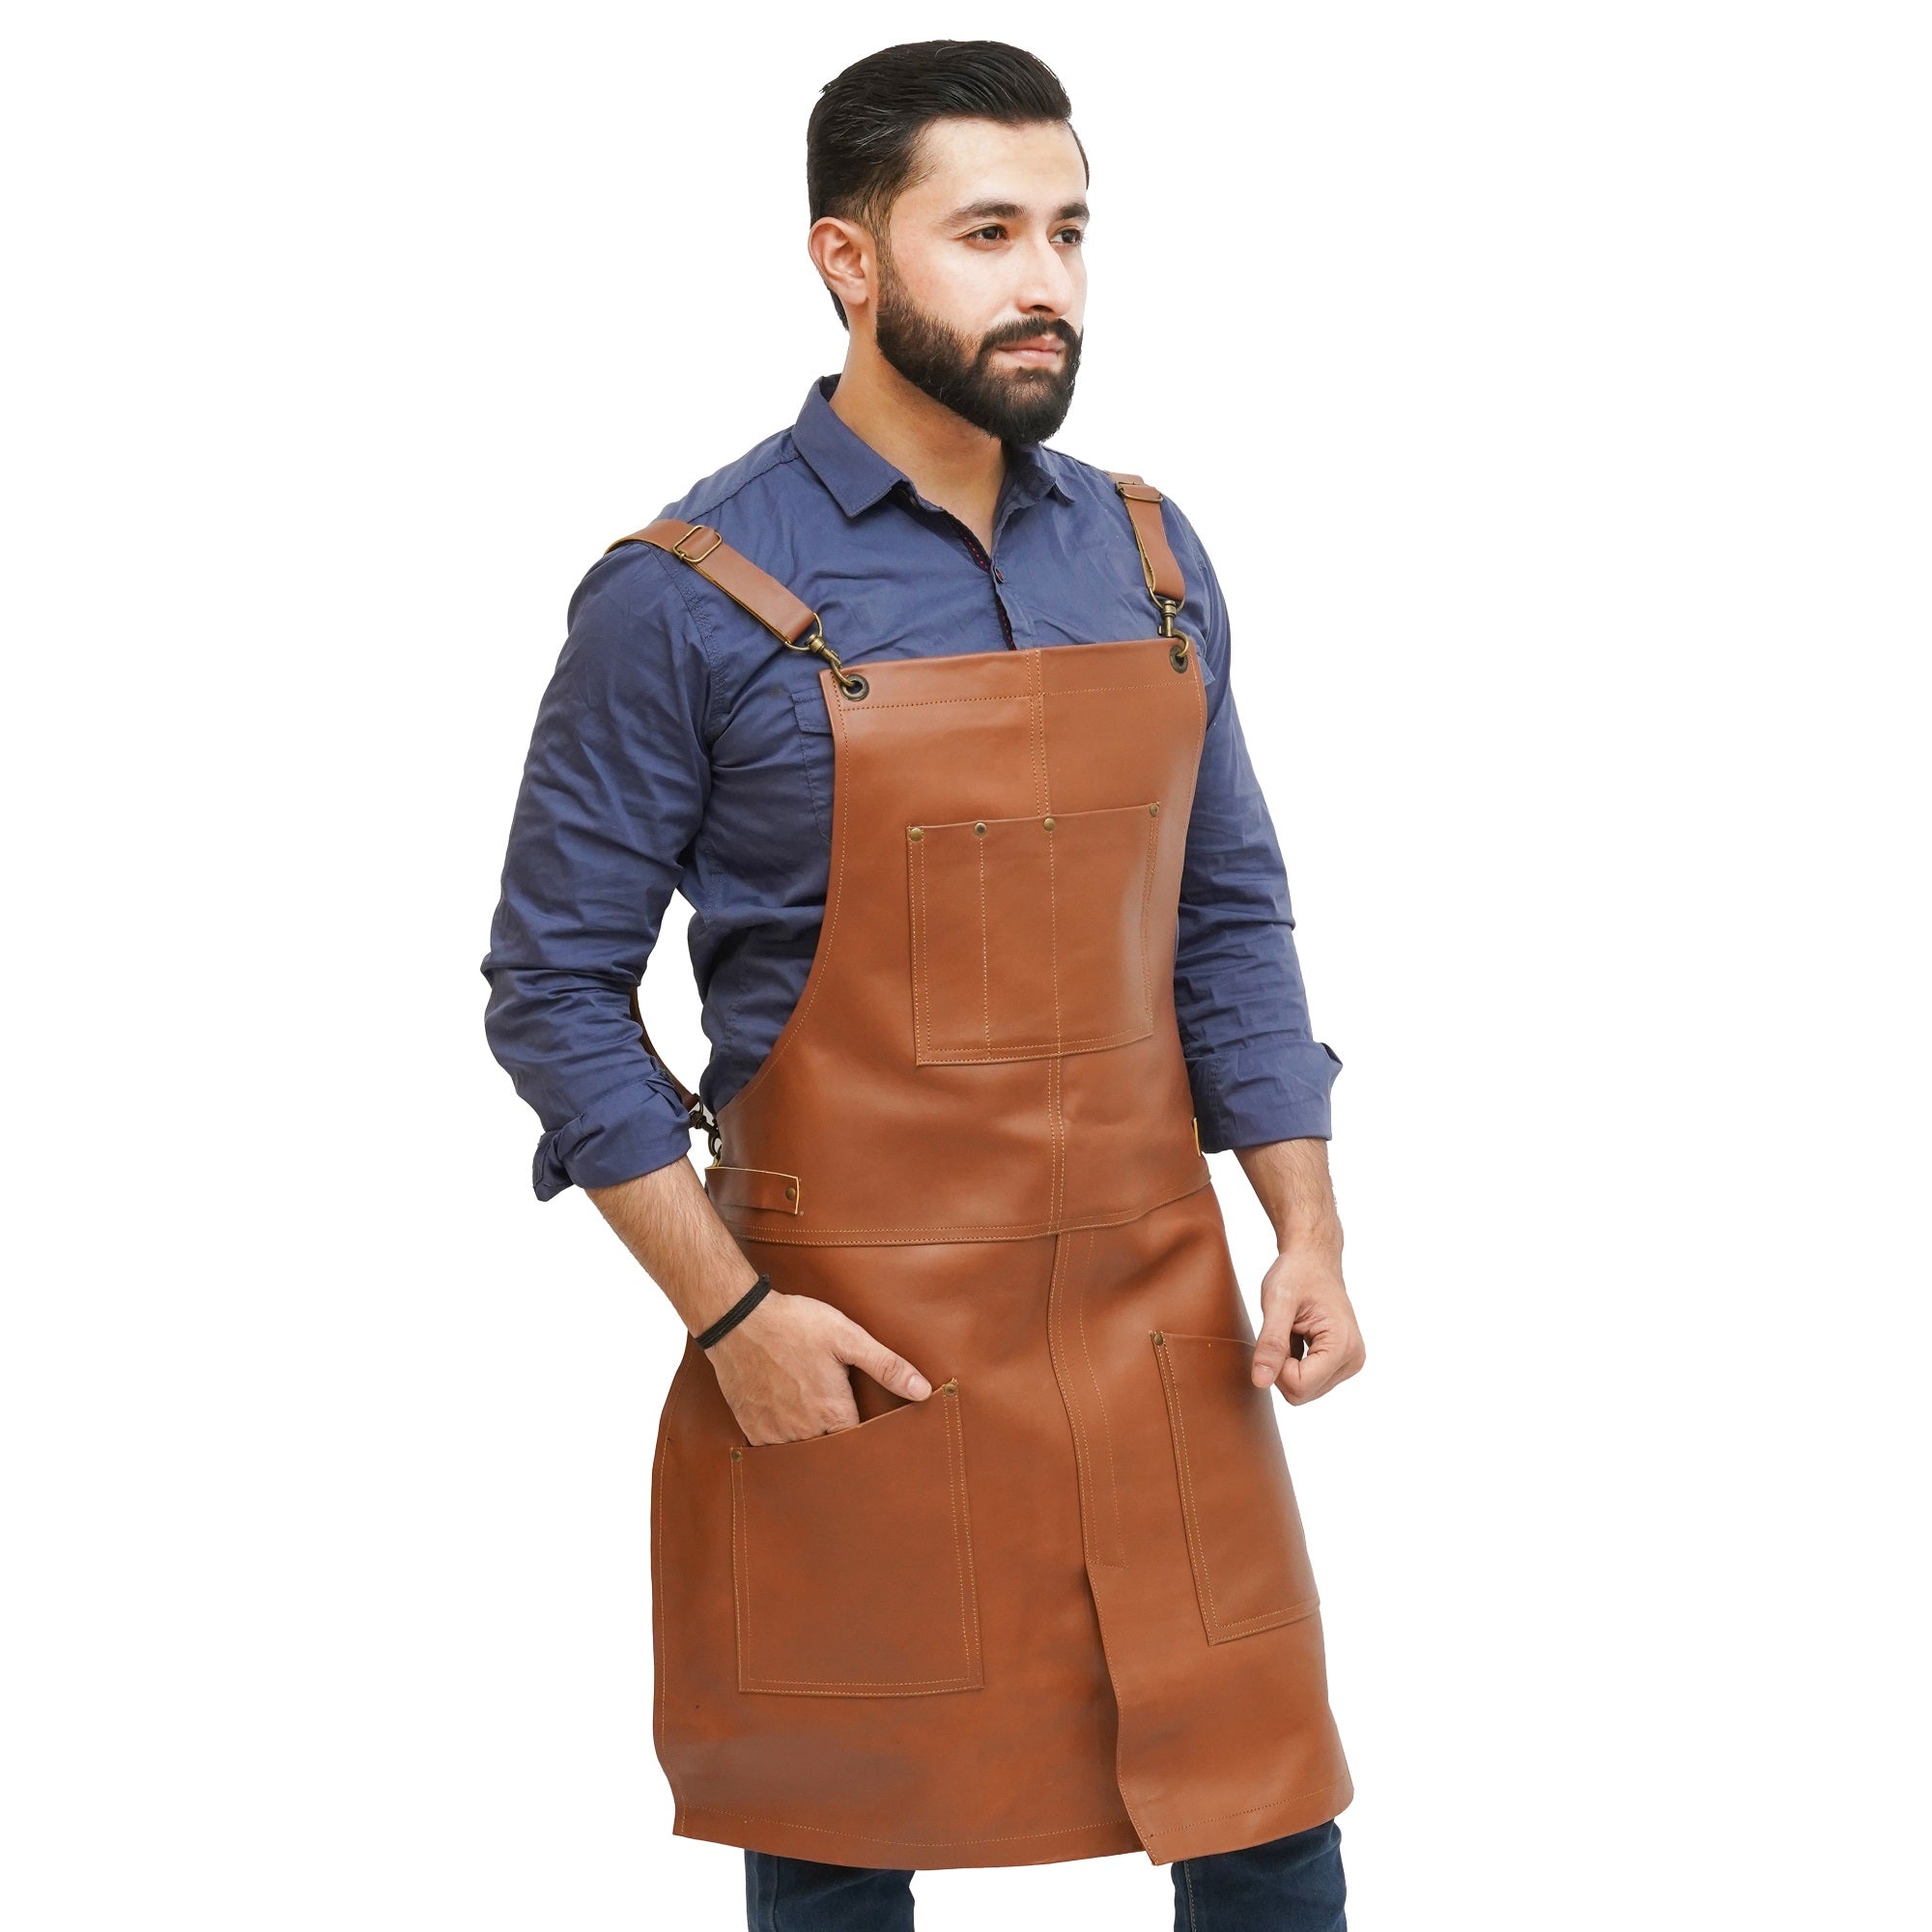 Leather Apron, Leather Chef Apron, Leather BBQ Apron, Leather Butcher Apron, Leather Barber Apron, Leather Welding Apron, Leather Blacksmith Apron, Leather Woodworking Apron, Leather Carpenter Apron , woodworkers apron leather